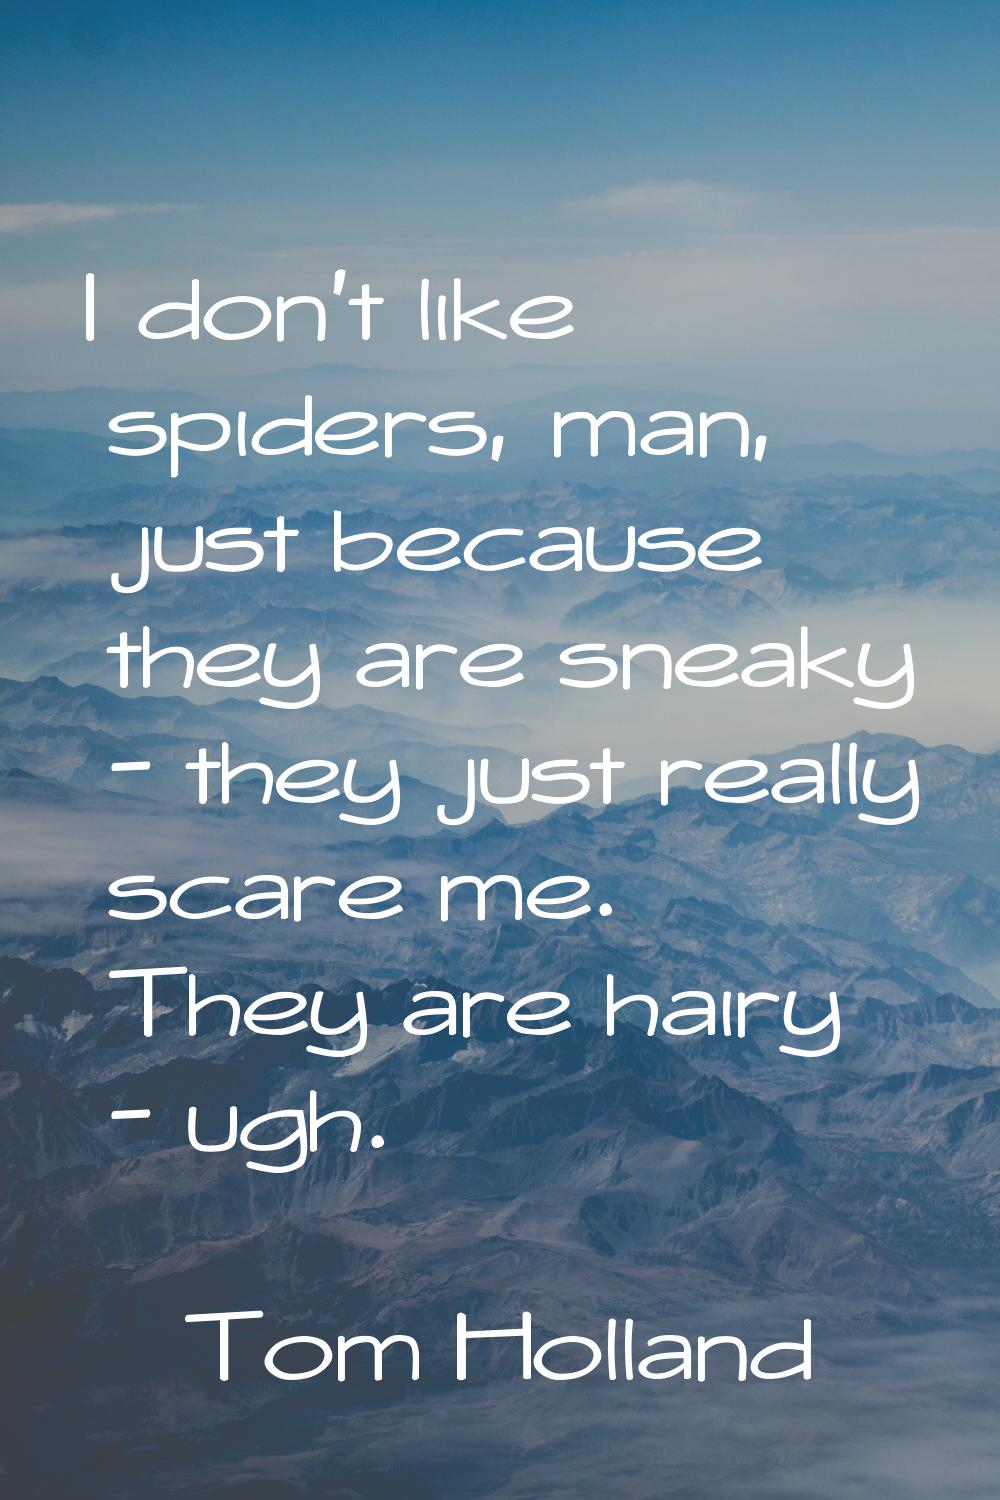 I don't like spiders, man, just because they are sneaky - they just really scare me. They are hairy